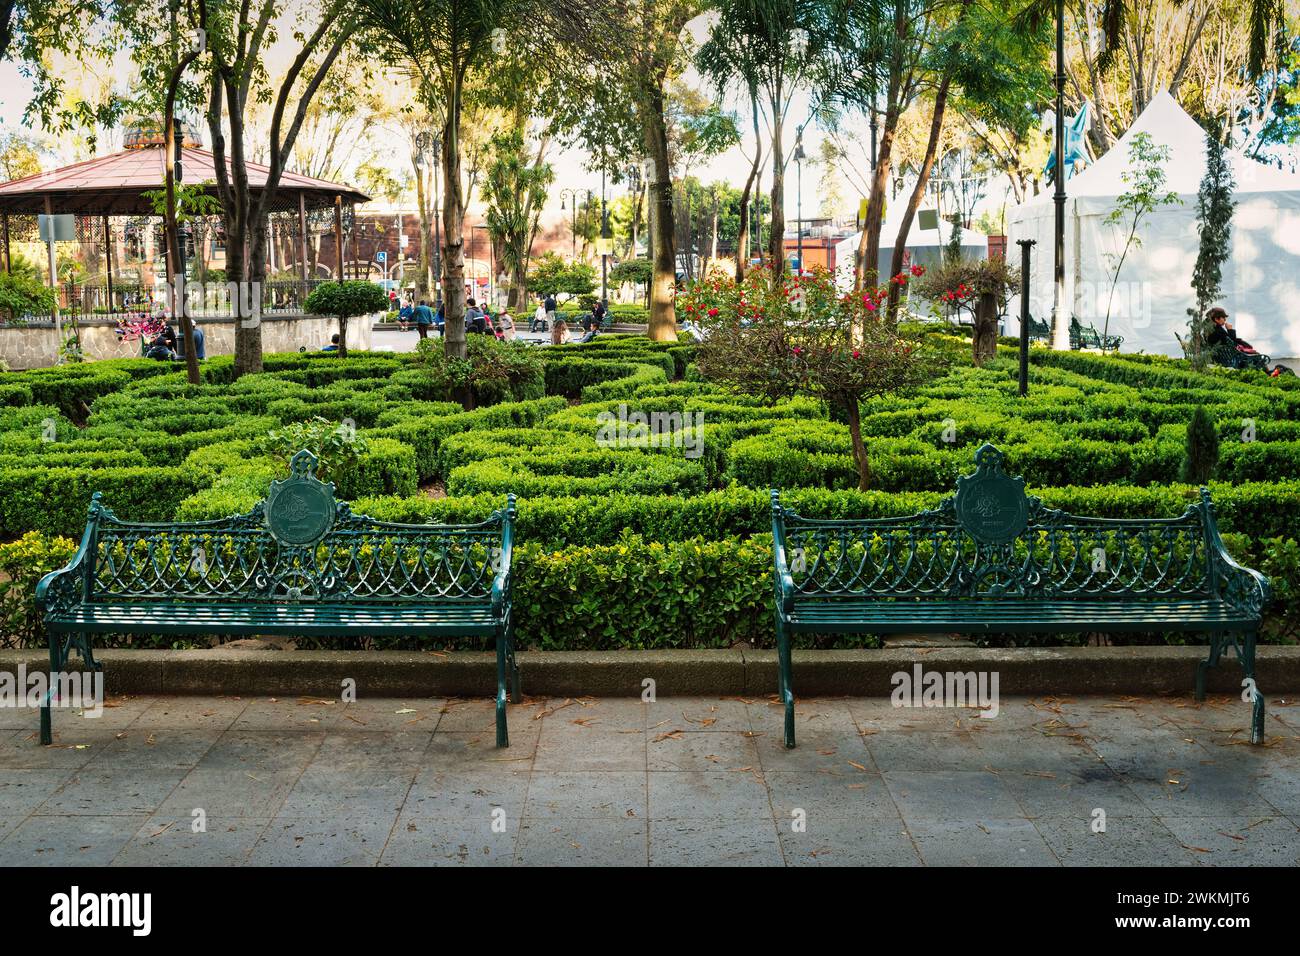 Ornate benches on Plaza Hidalgo in downtown Coyoacán district of Mexico City, Mexico. Stock Photo